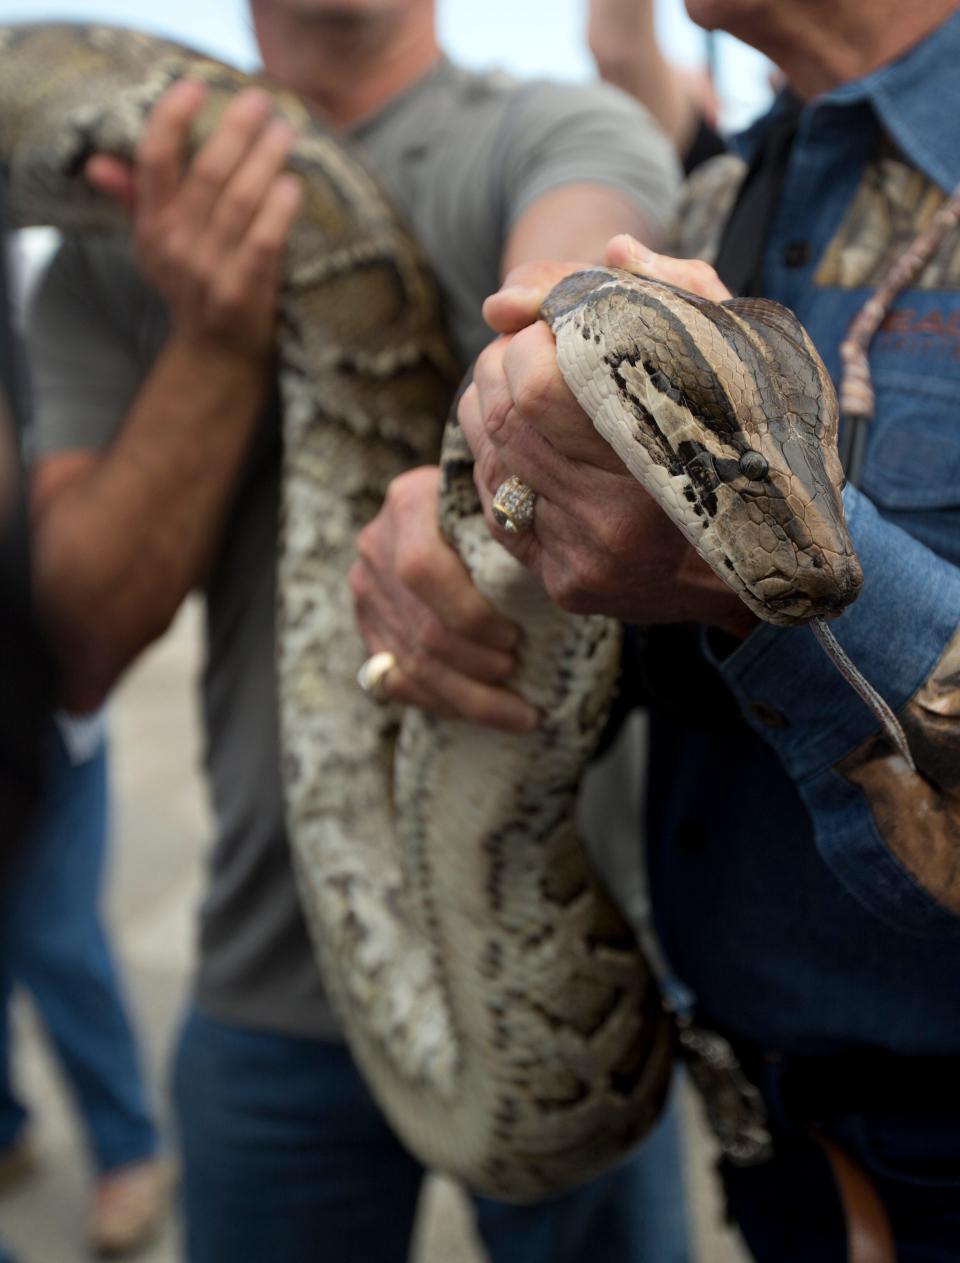 In this Jan. 17, 2013, file photo, a captured 13-foot-long Burmese python is displayed for snake hunters and the media before heading out in airboats for the Python Challenge in the Florida Everglades.